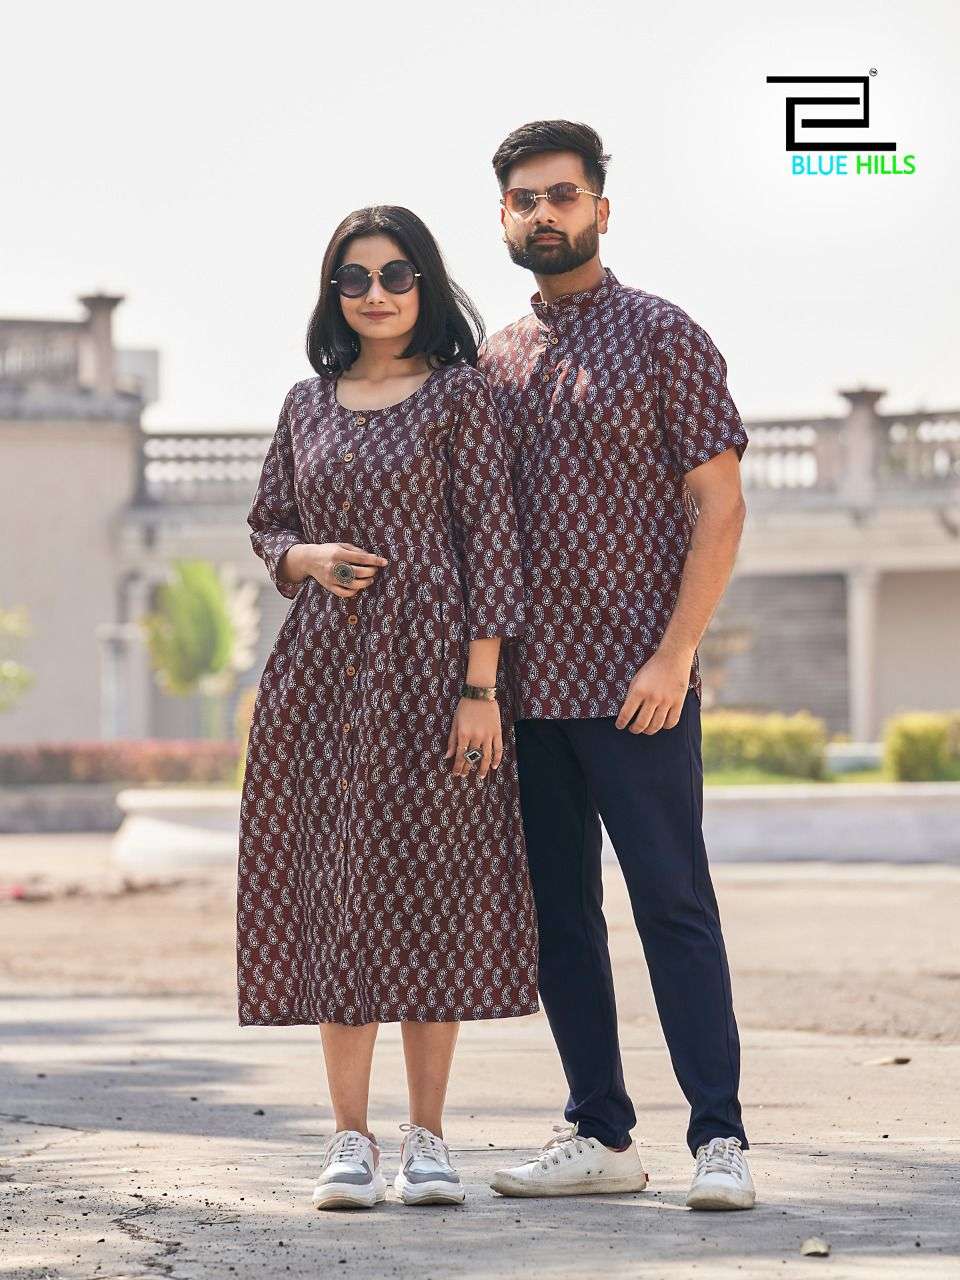 Maxi Dress Couple Tshirts - Buy Maxi Dress Couple Tshirts Online at Best  Prices In India | Flipkart.com